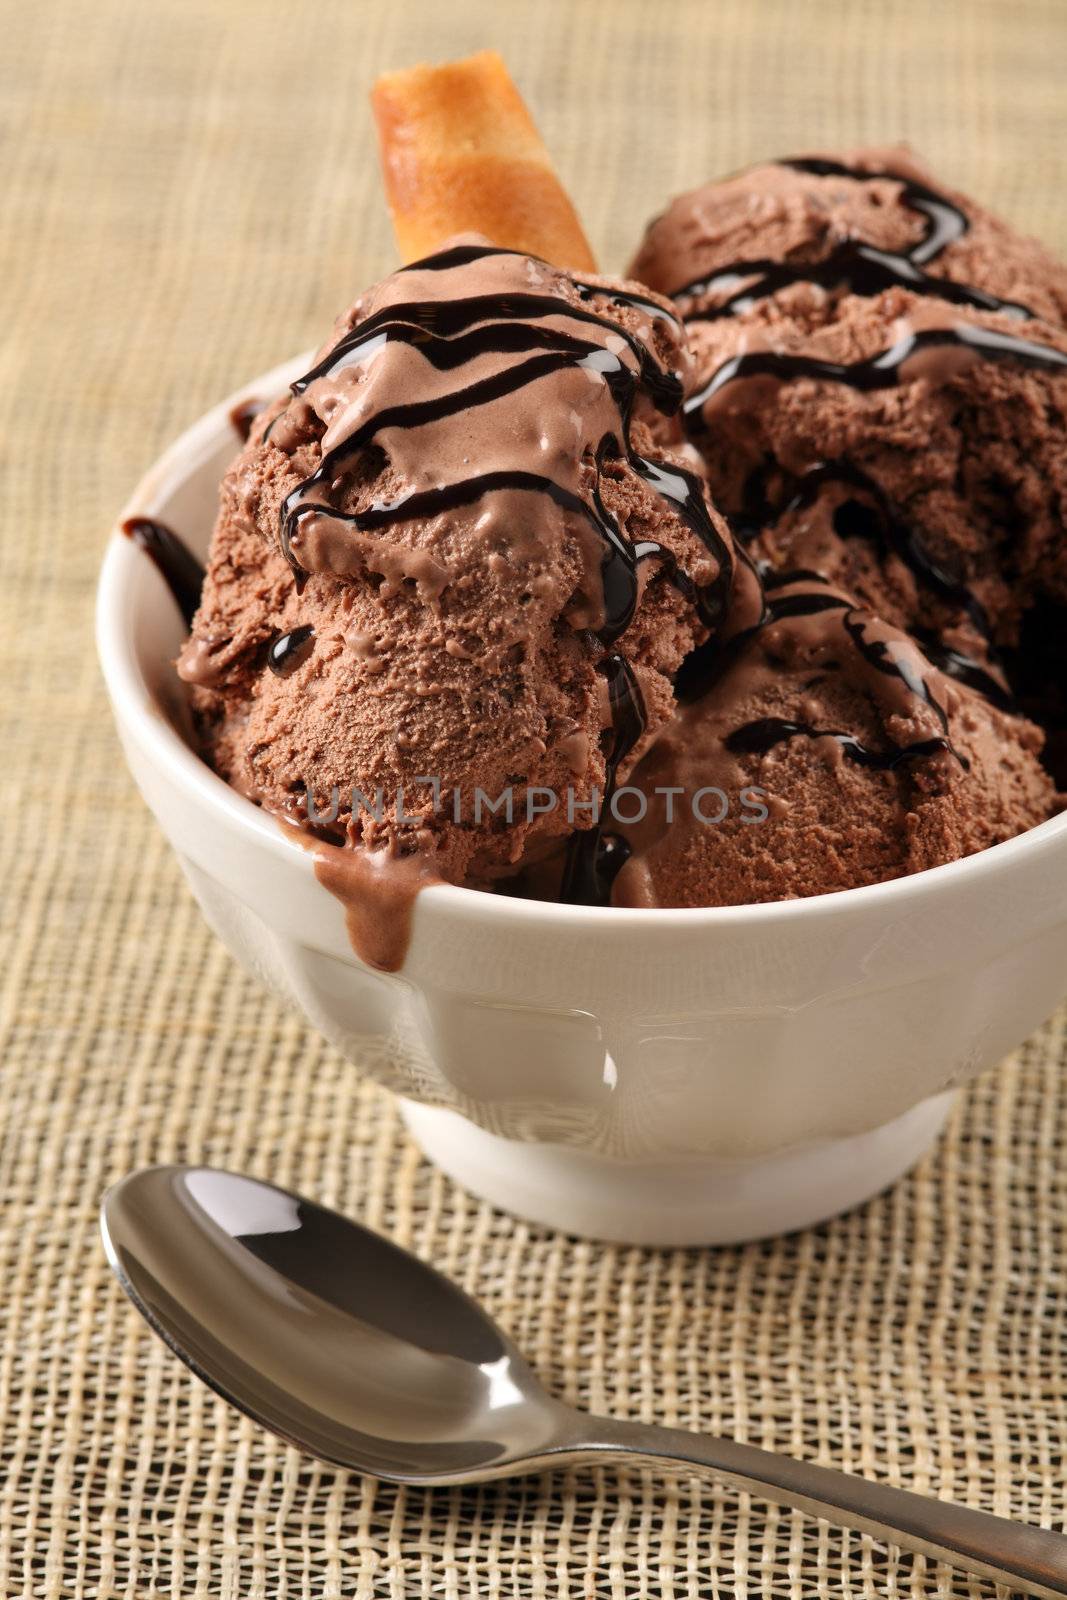 Bowl of chocolate ice cream by sumners